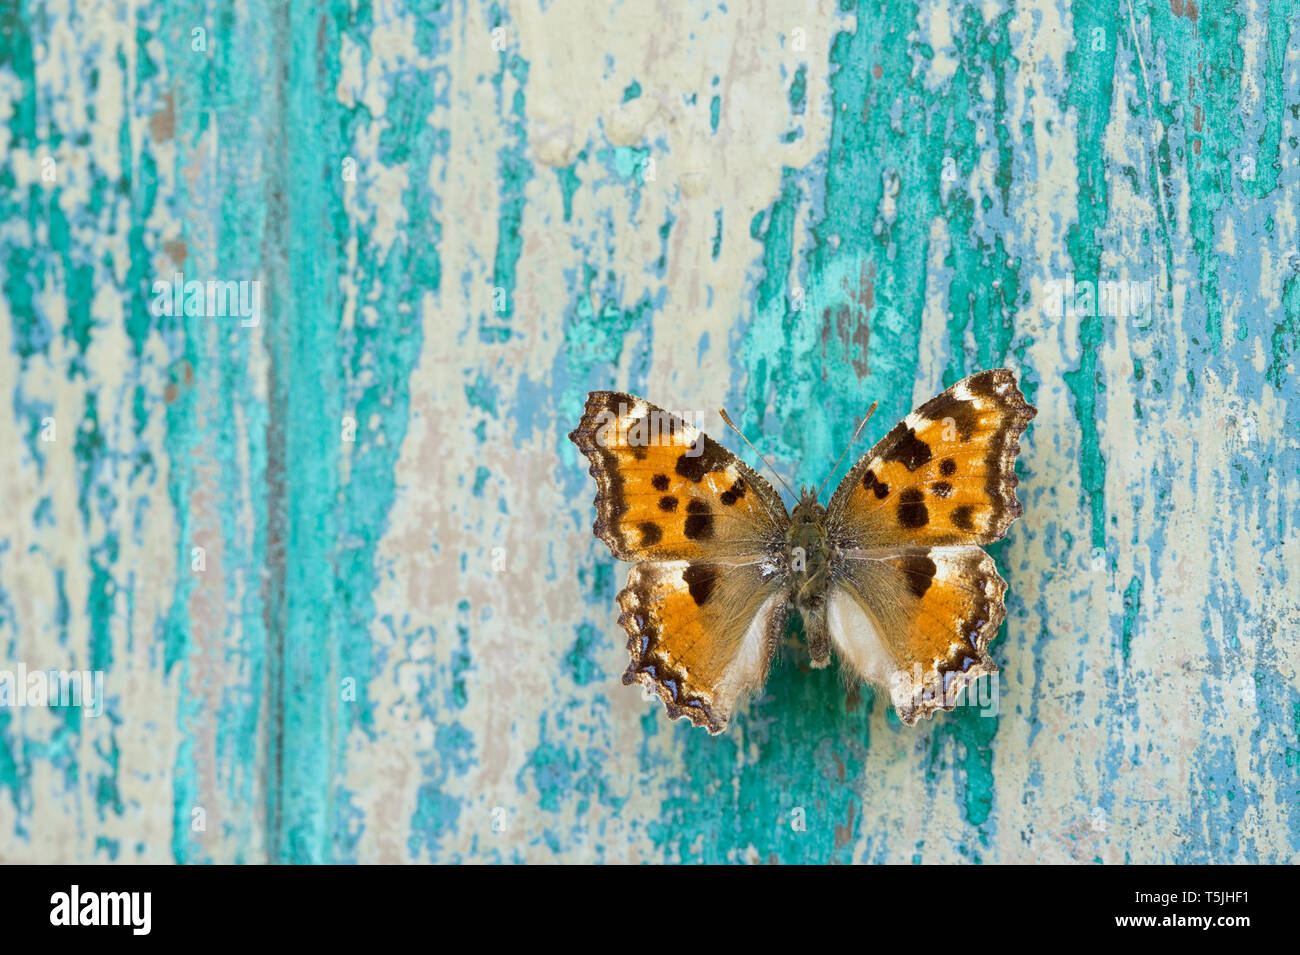 Butterfly on flaking turquoise wood Stock Photo